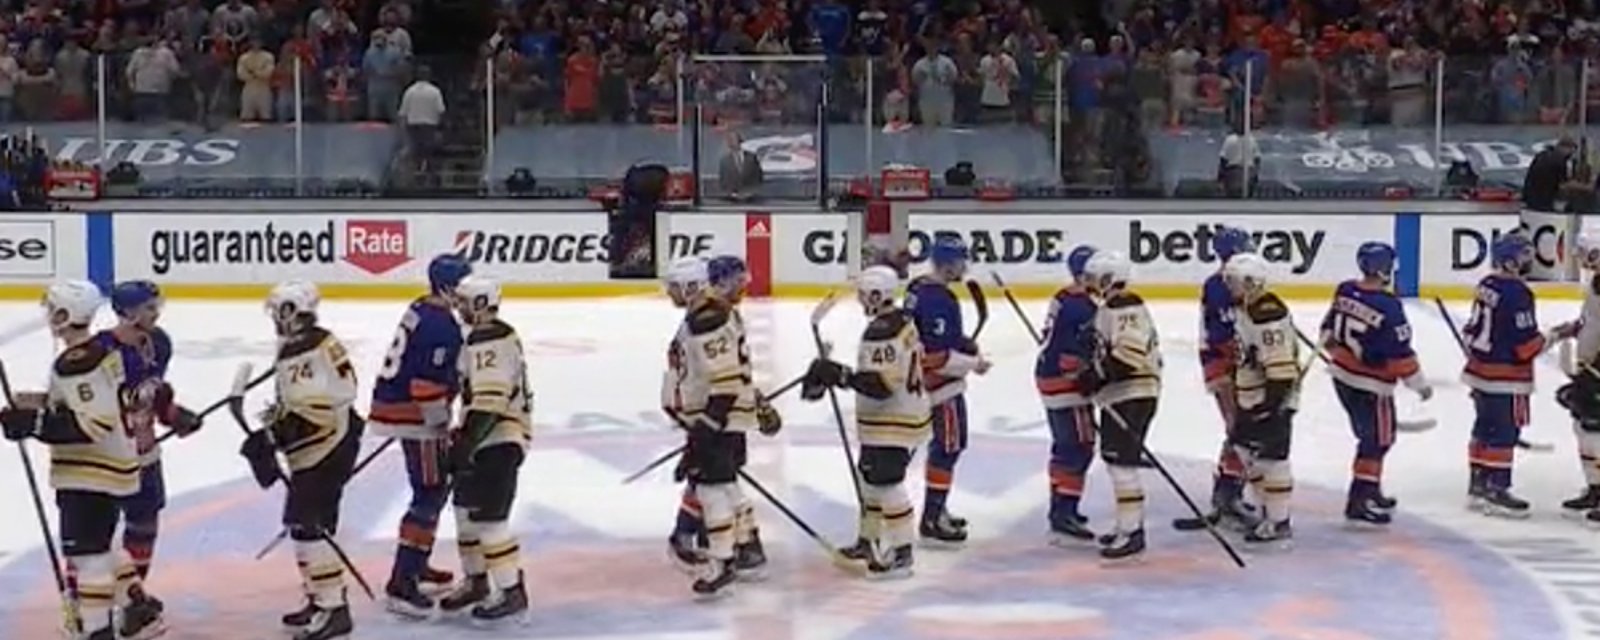 Bruins eliminated from the playoffs by Islanders in blowout 6-2 loss